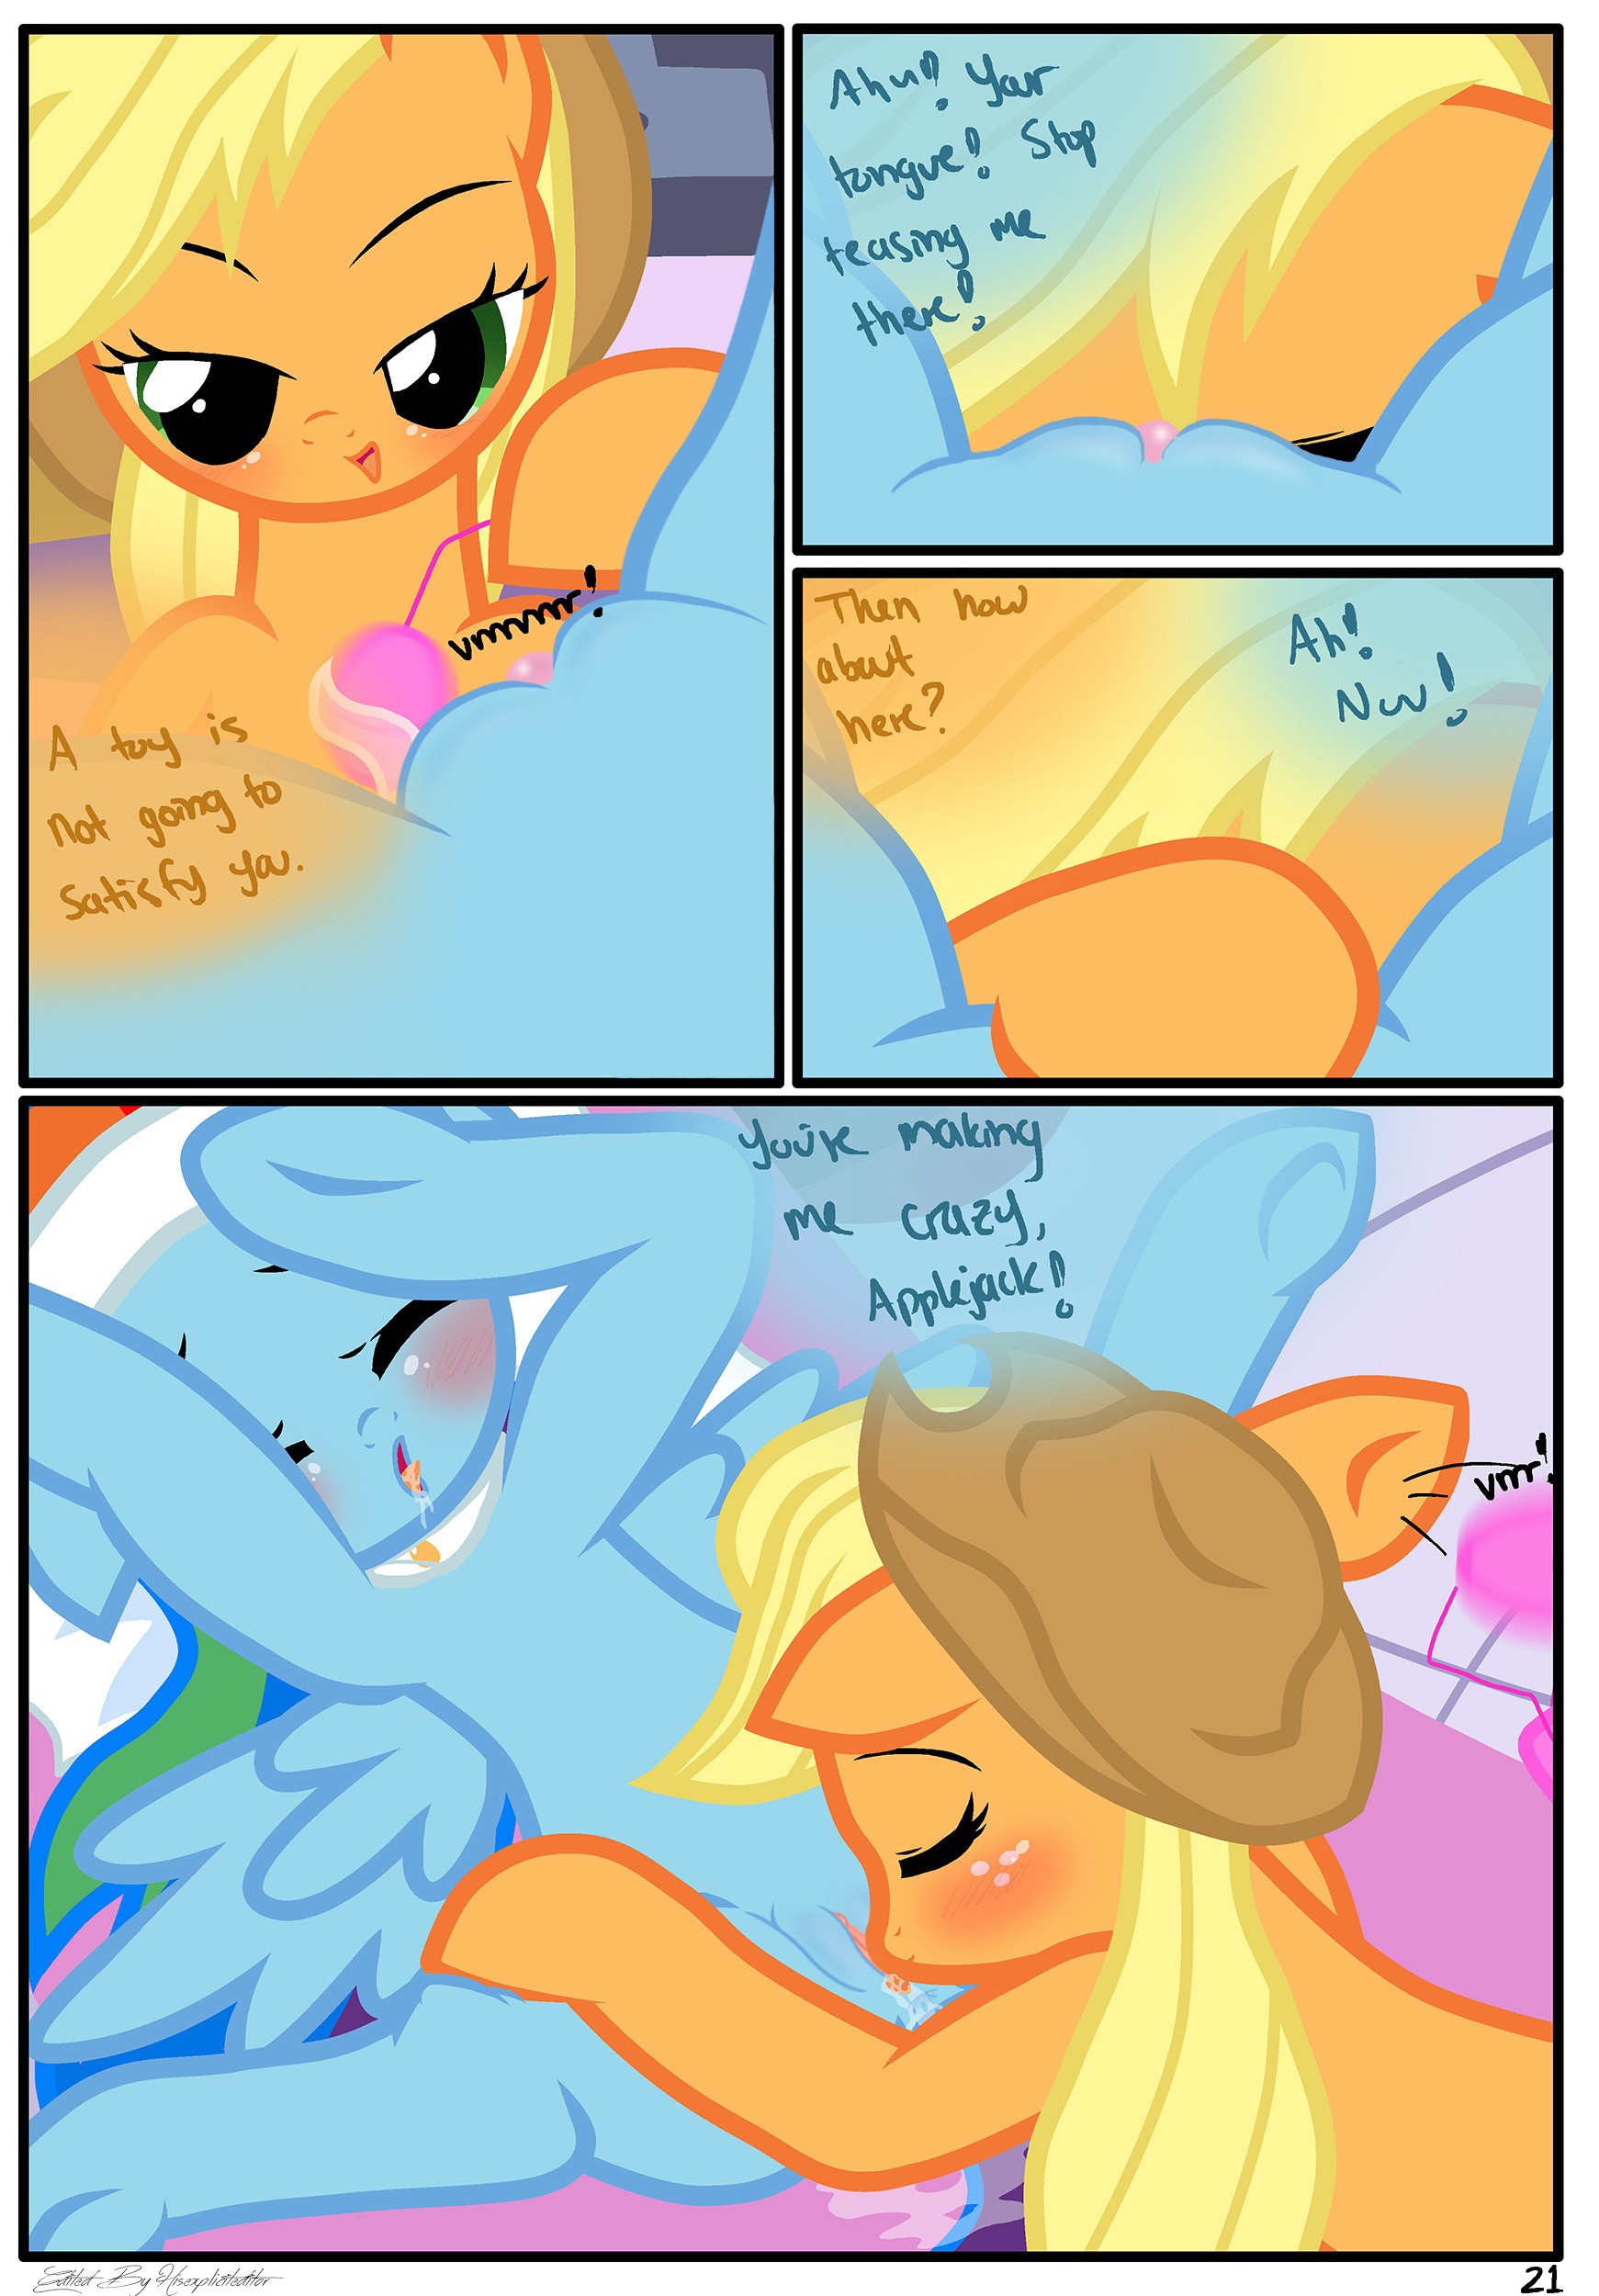 The Usual - Part 2 porn comic picture 22